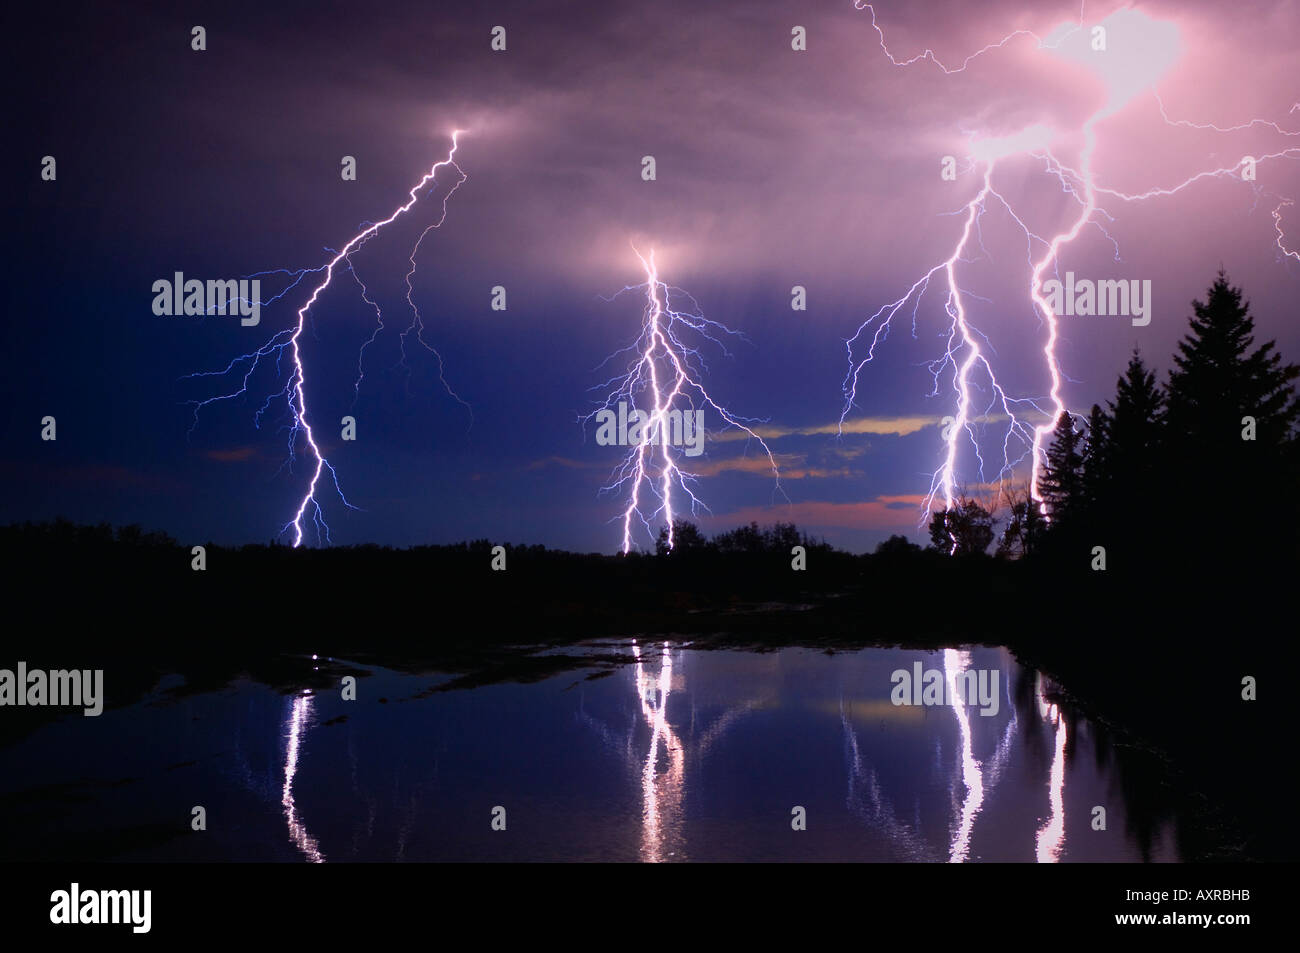 Lightning storm over a lake Stock Photo